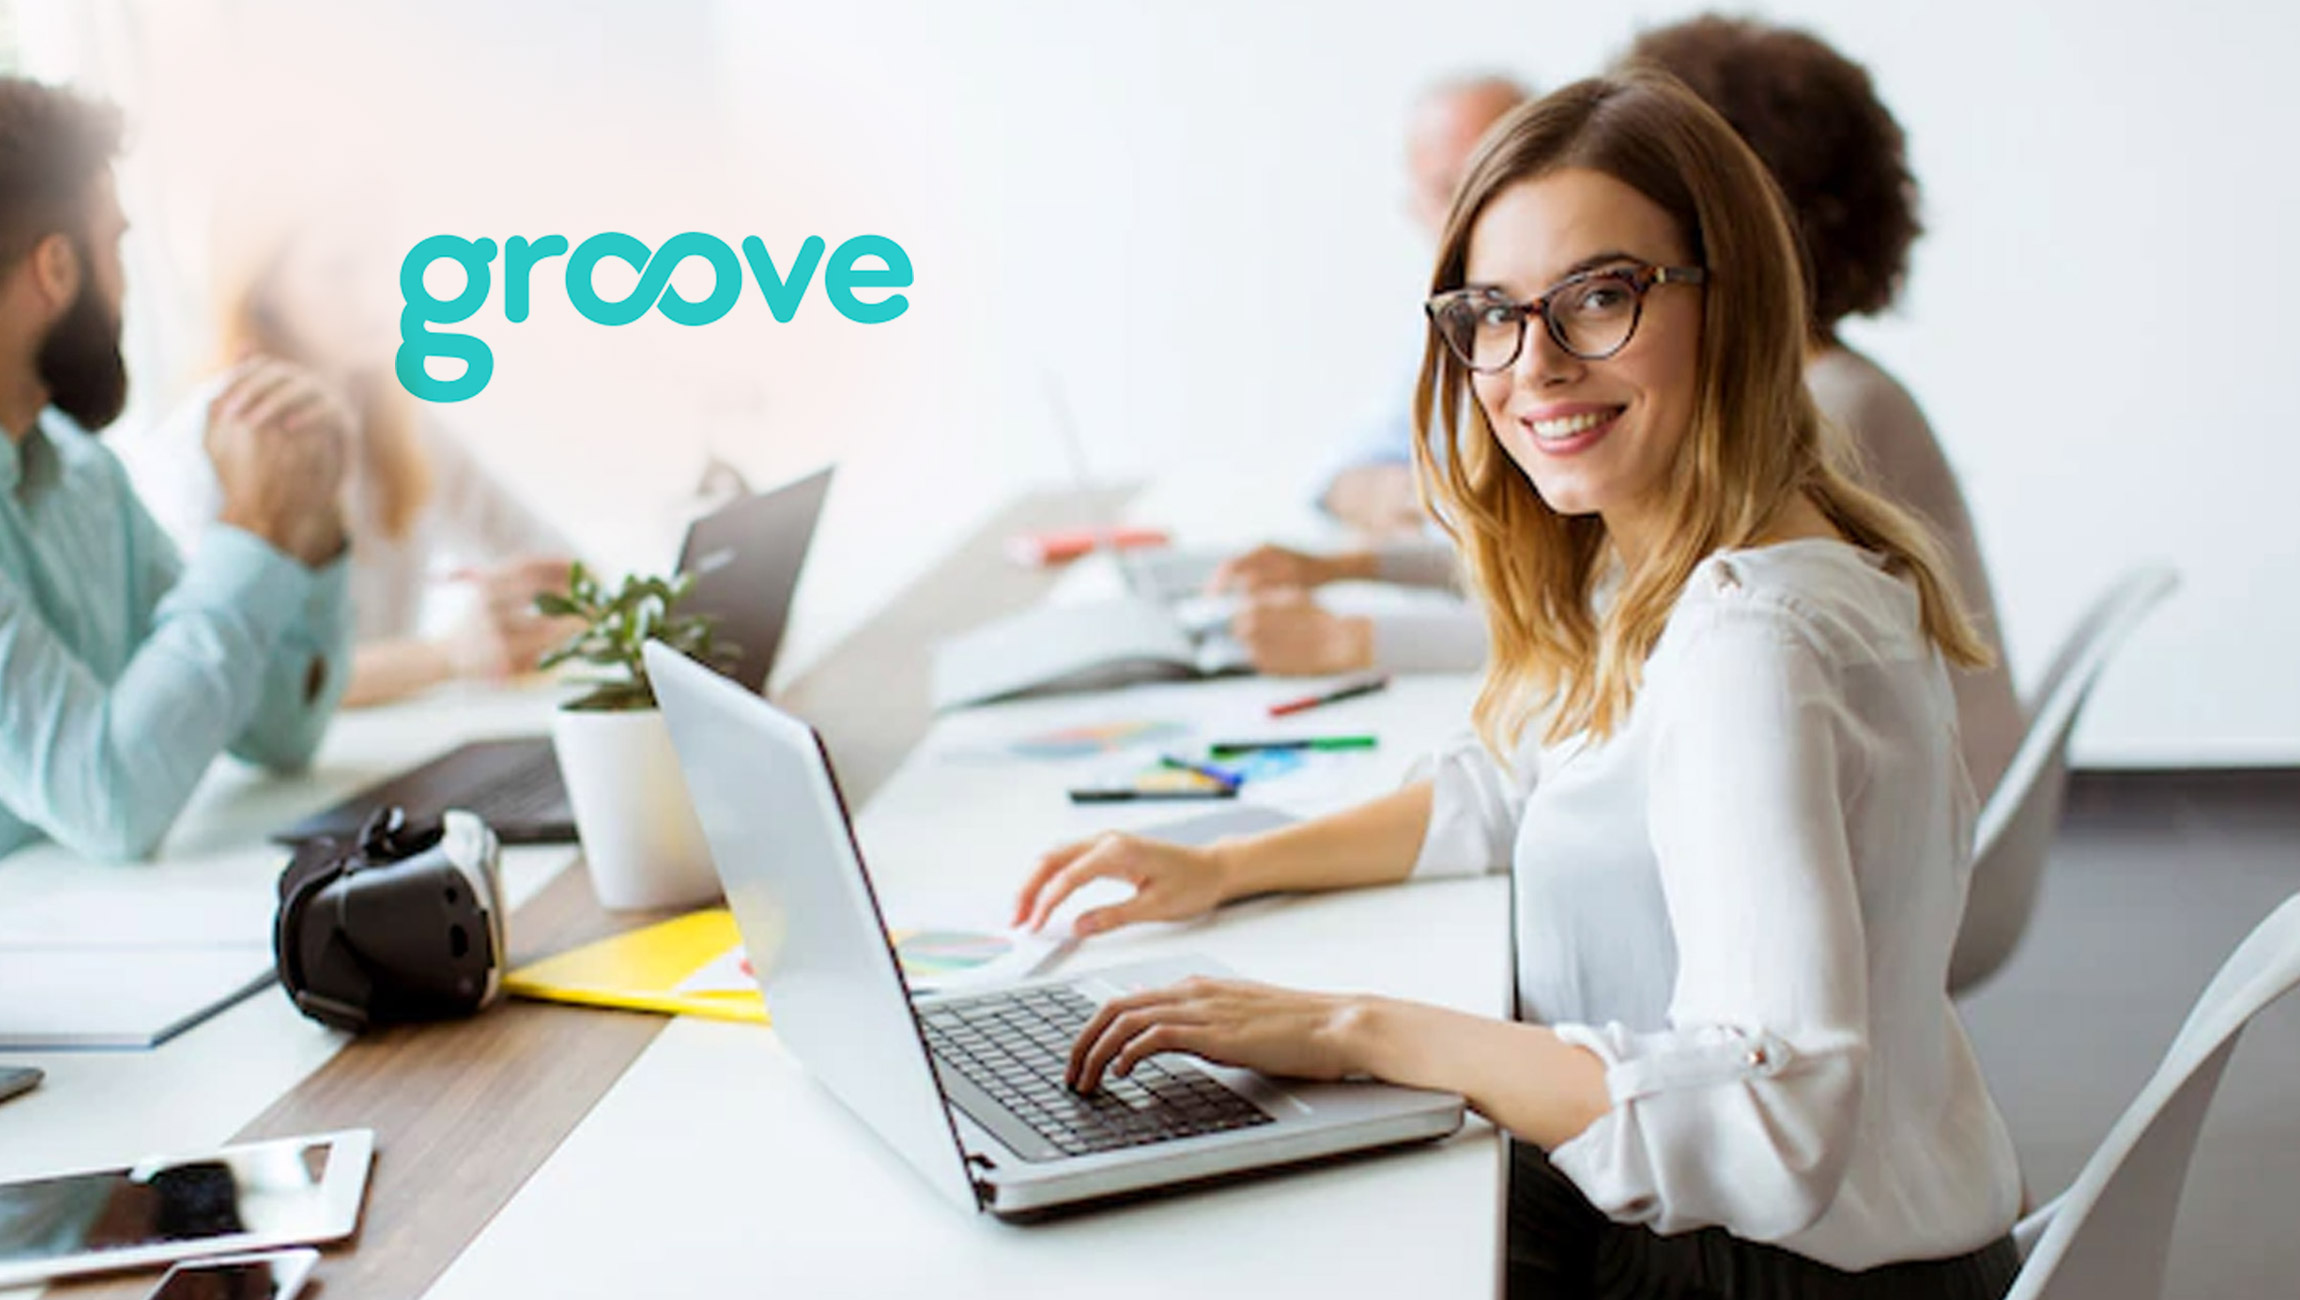 Groove Ranked #3 Best Place to Work in the SF Bay Area